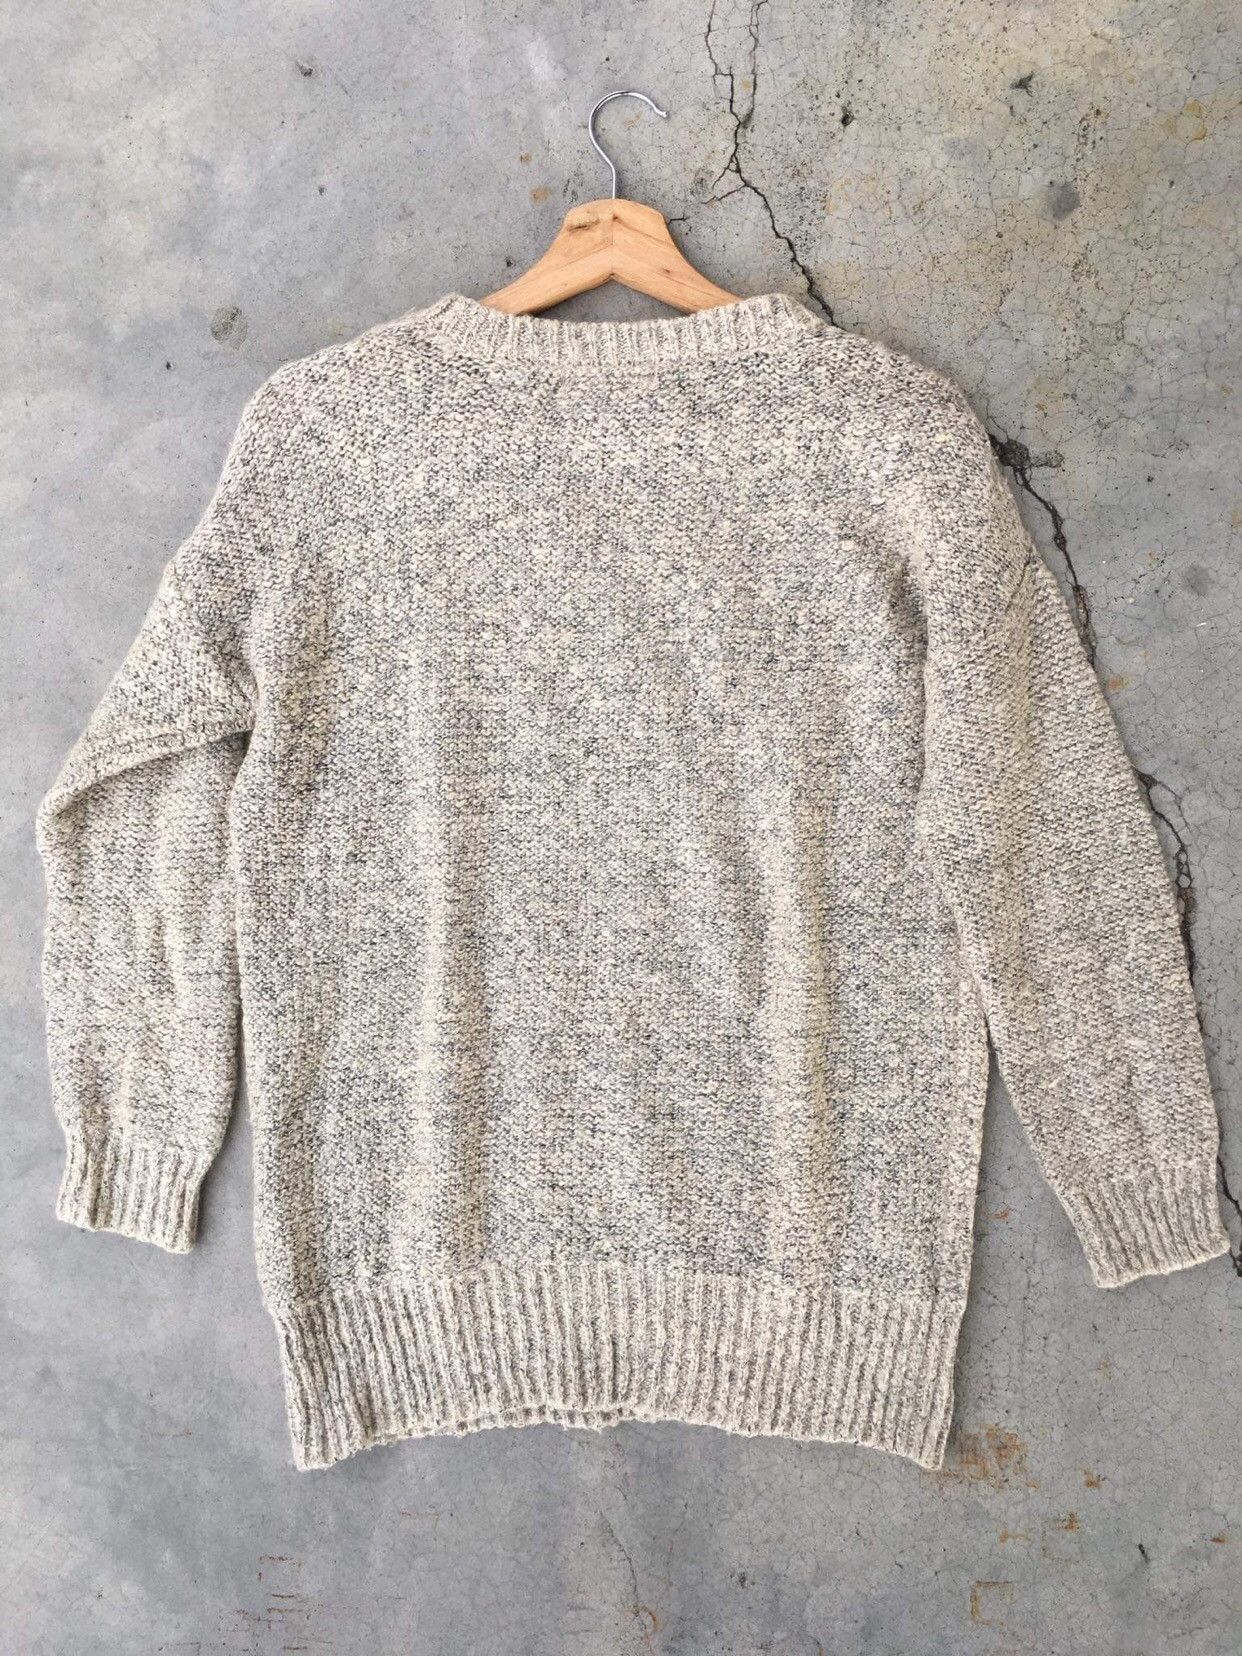 Japanese Brand 🔴LETTER Back Number Sweater Pureknit Pullover Size US M / EU 48-50 / 2 - 11 Thumbnail